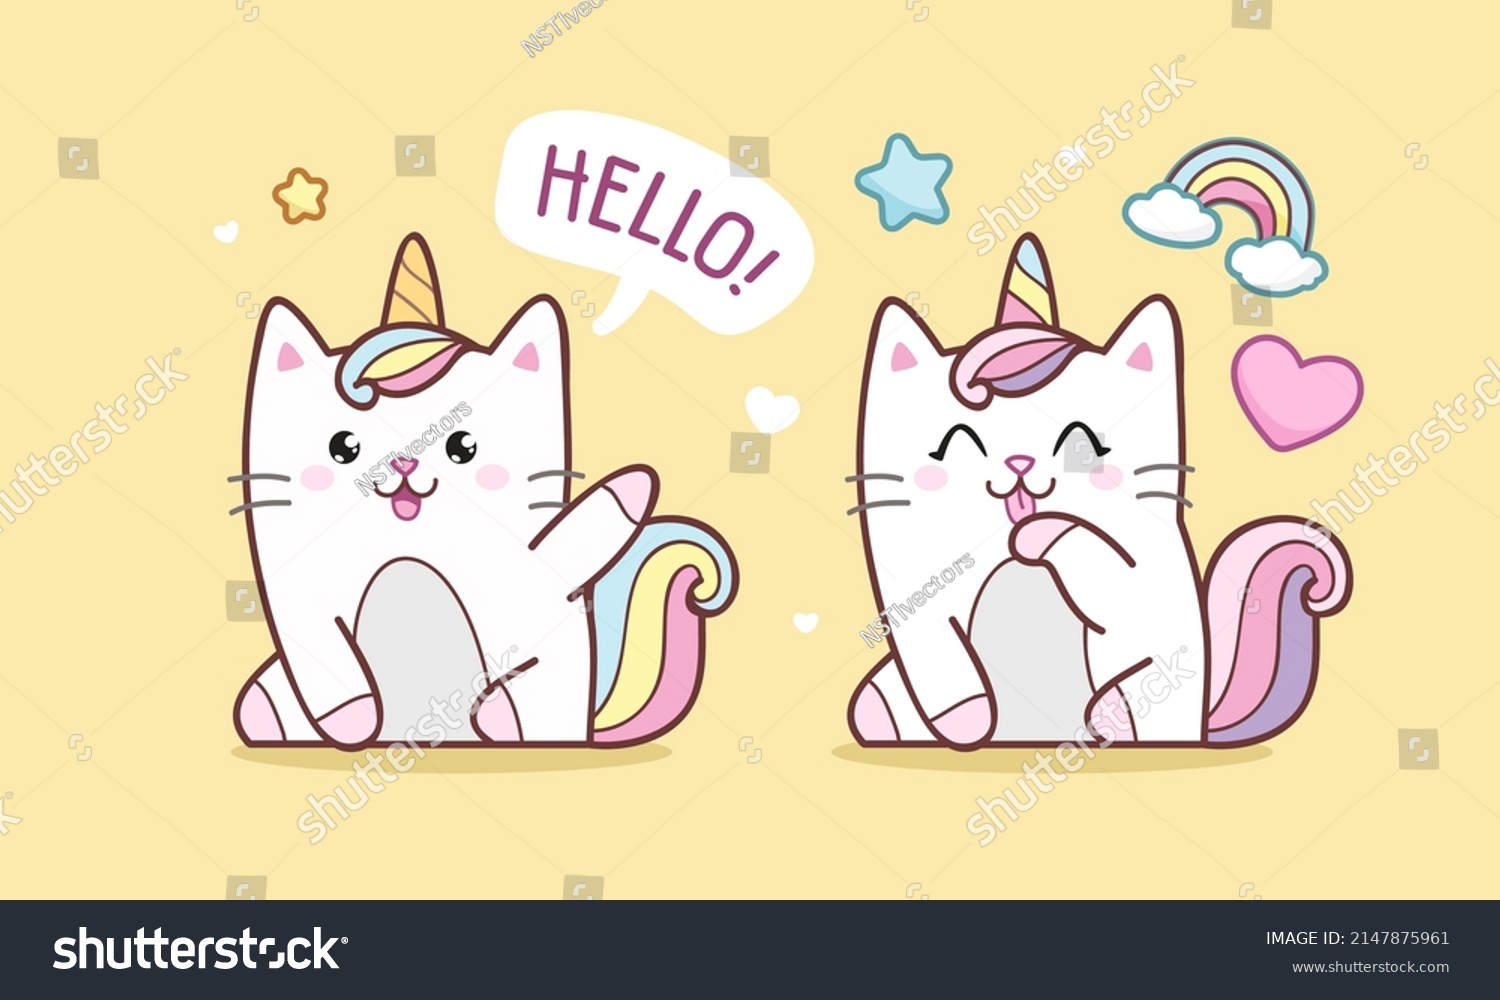 SVG of Cute Cat Caticorn or Kitten Unicorn set with rainbow and hearts. Vector Cat Unicorn says Hello! Isolated vector illustration for kids design prints, posters, t-shirts, stickers svg